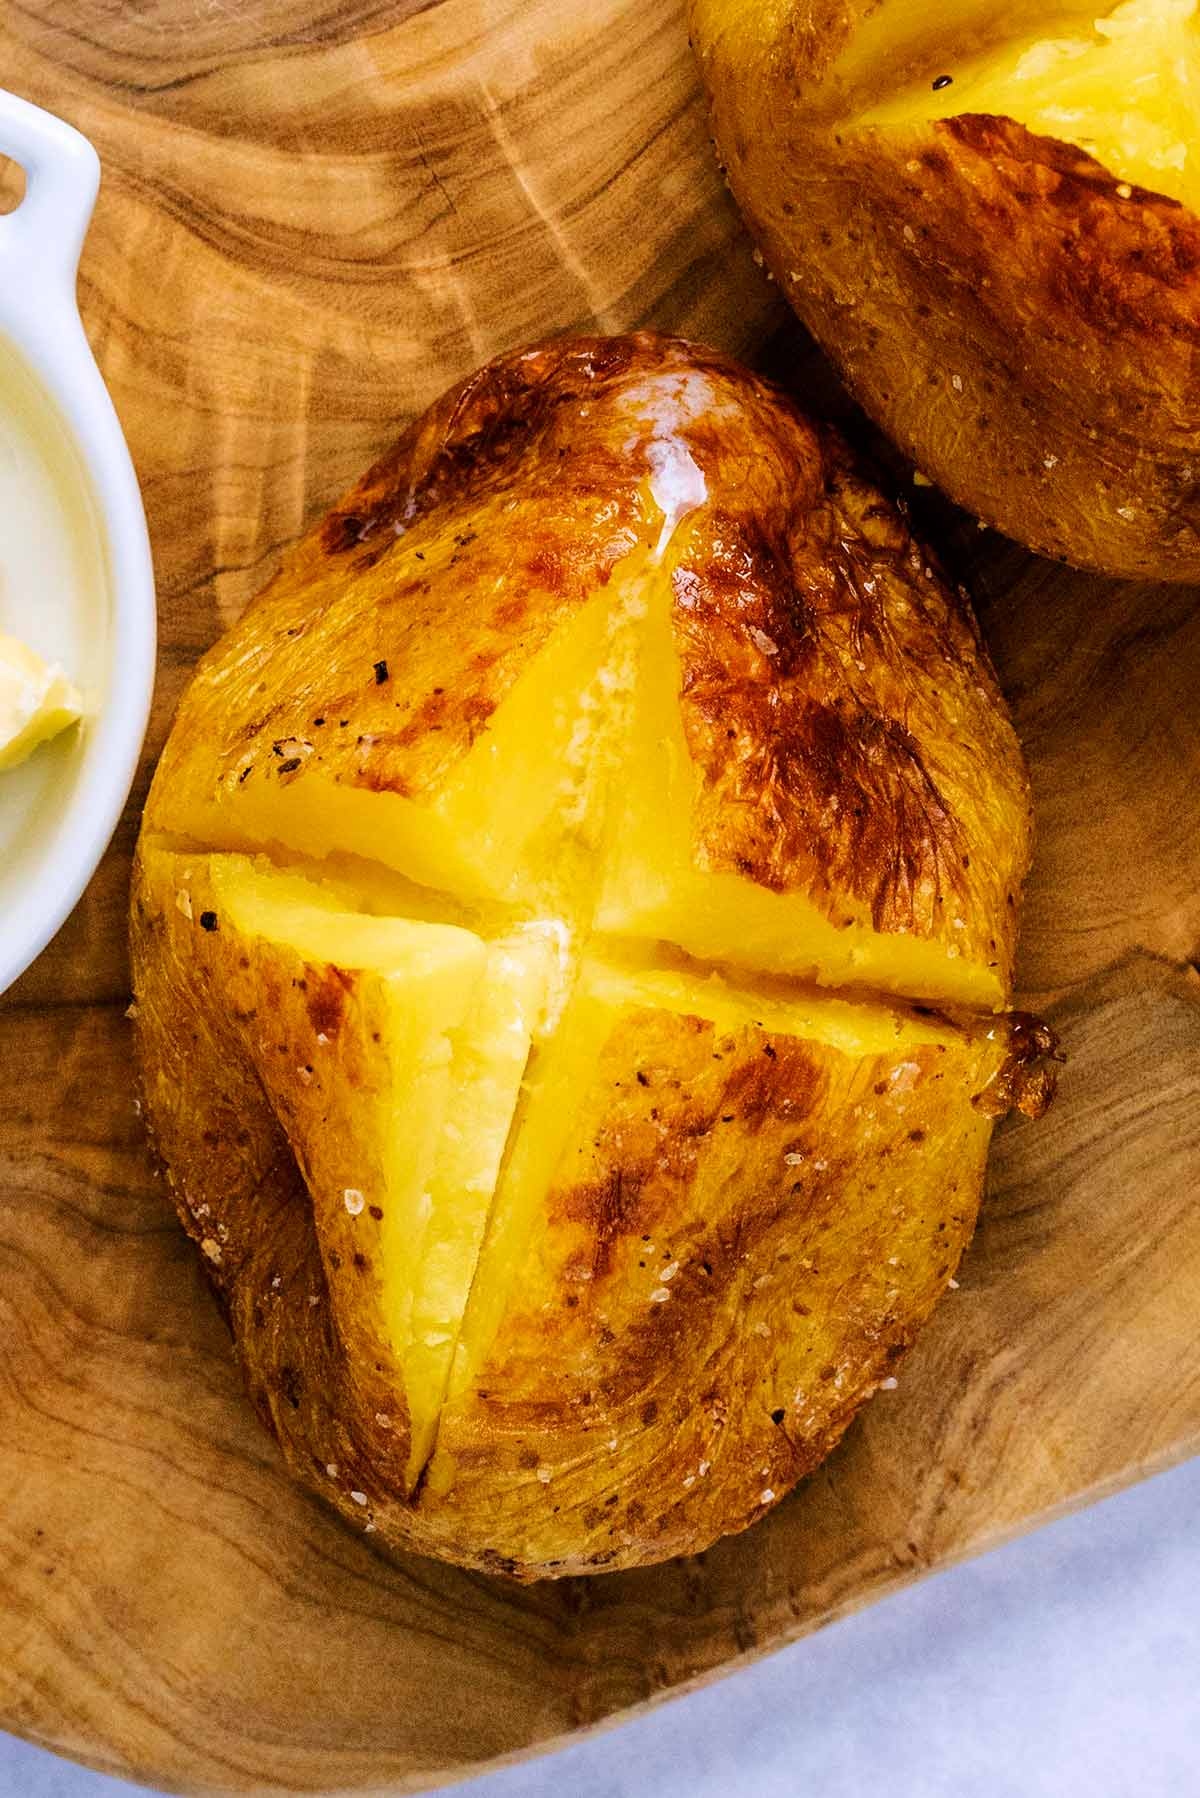 A baked potato cut open in a cross, with melted butter in it.